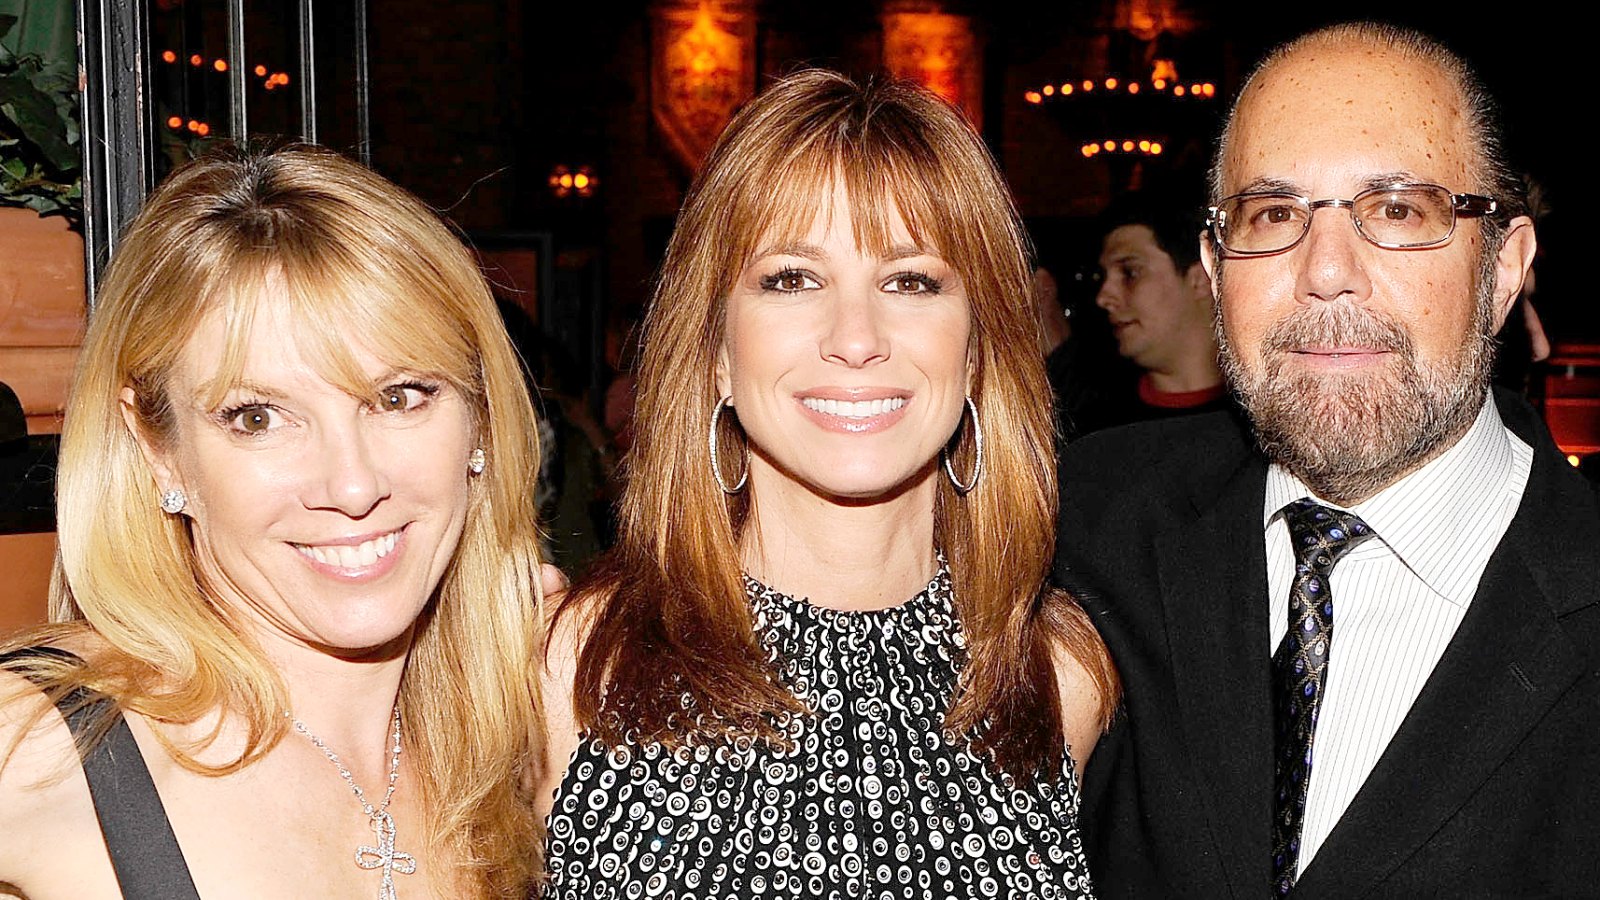 Ramona Singer, Jill Zarin, Bobby Zarin during the Entertainment Weekly & Vavoom Annual Upfront Party at the Bowery Hotel on May 13, 2008 in New York City.